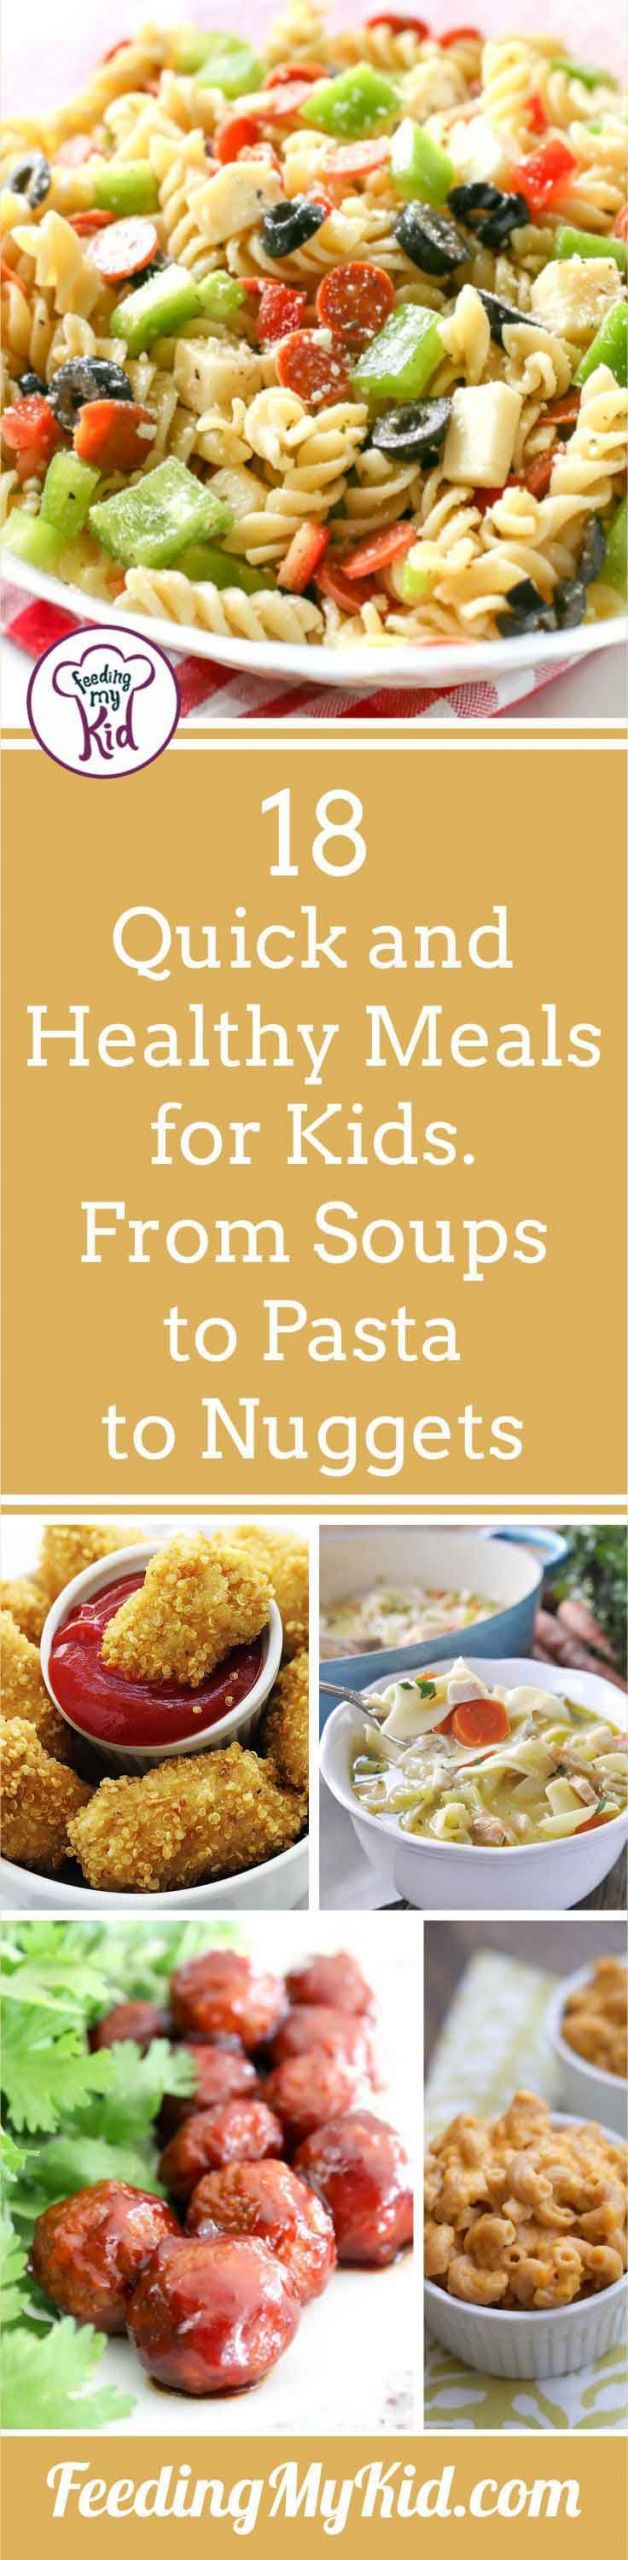 Easy Dinner Recipes Kids Can Make
 The 25 best Daycare meals ideas on Pinterest